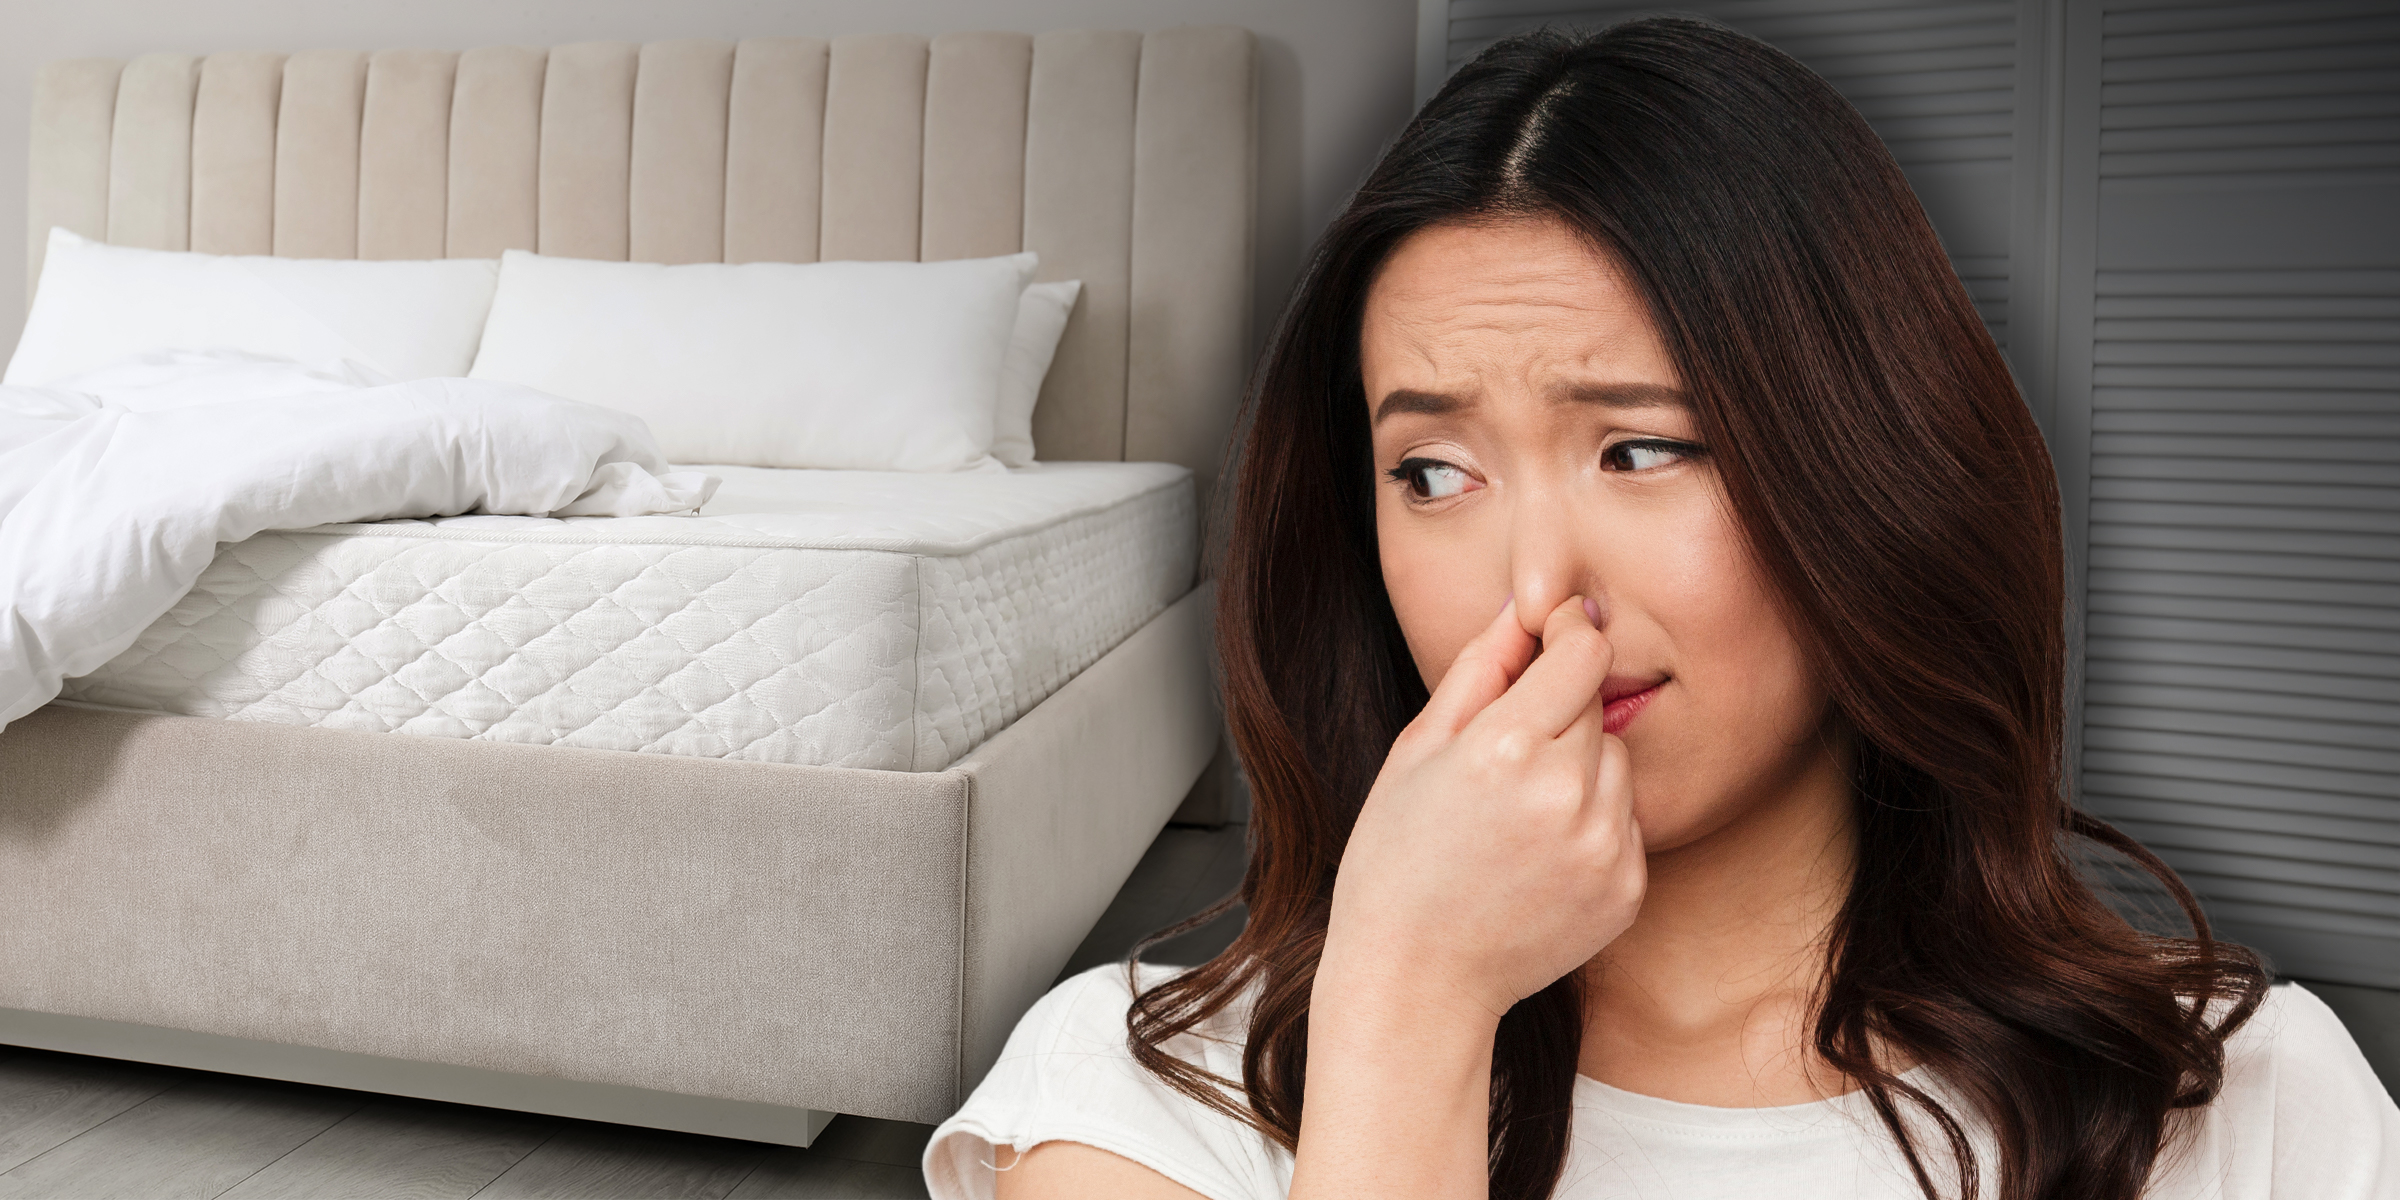 A mattress | A woman pinching her nose due to a bad smell | Source: Shutterstock